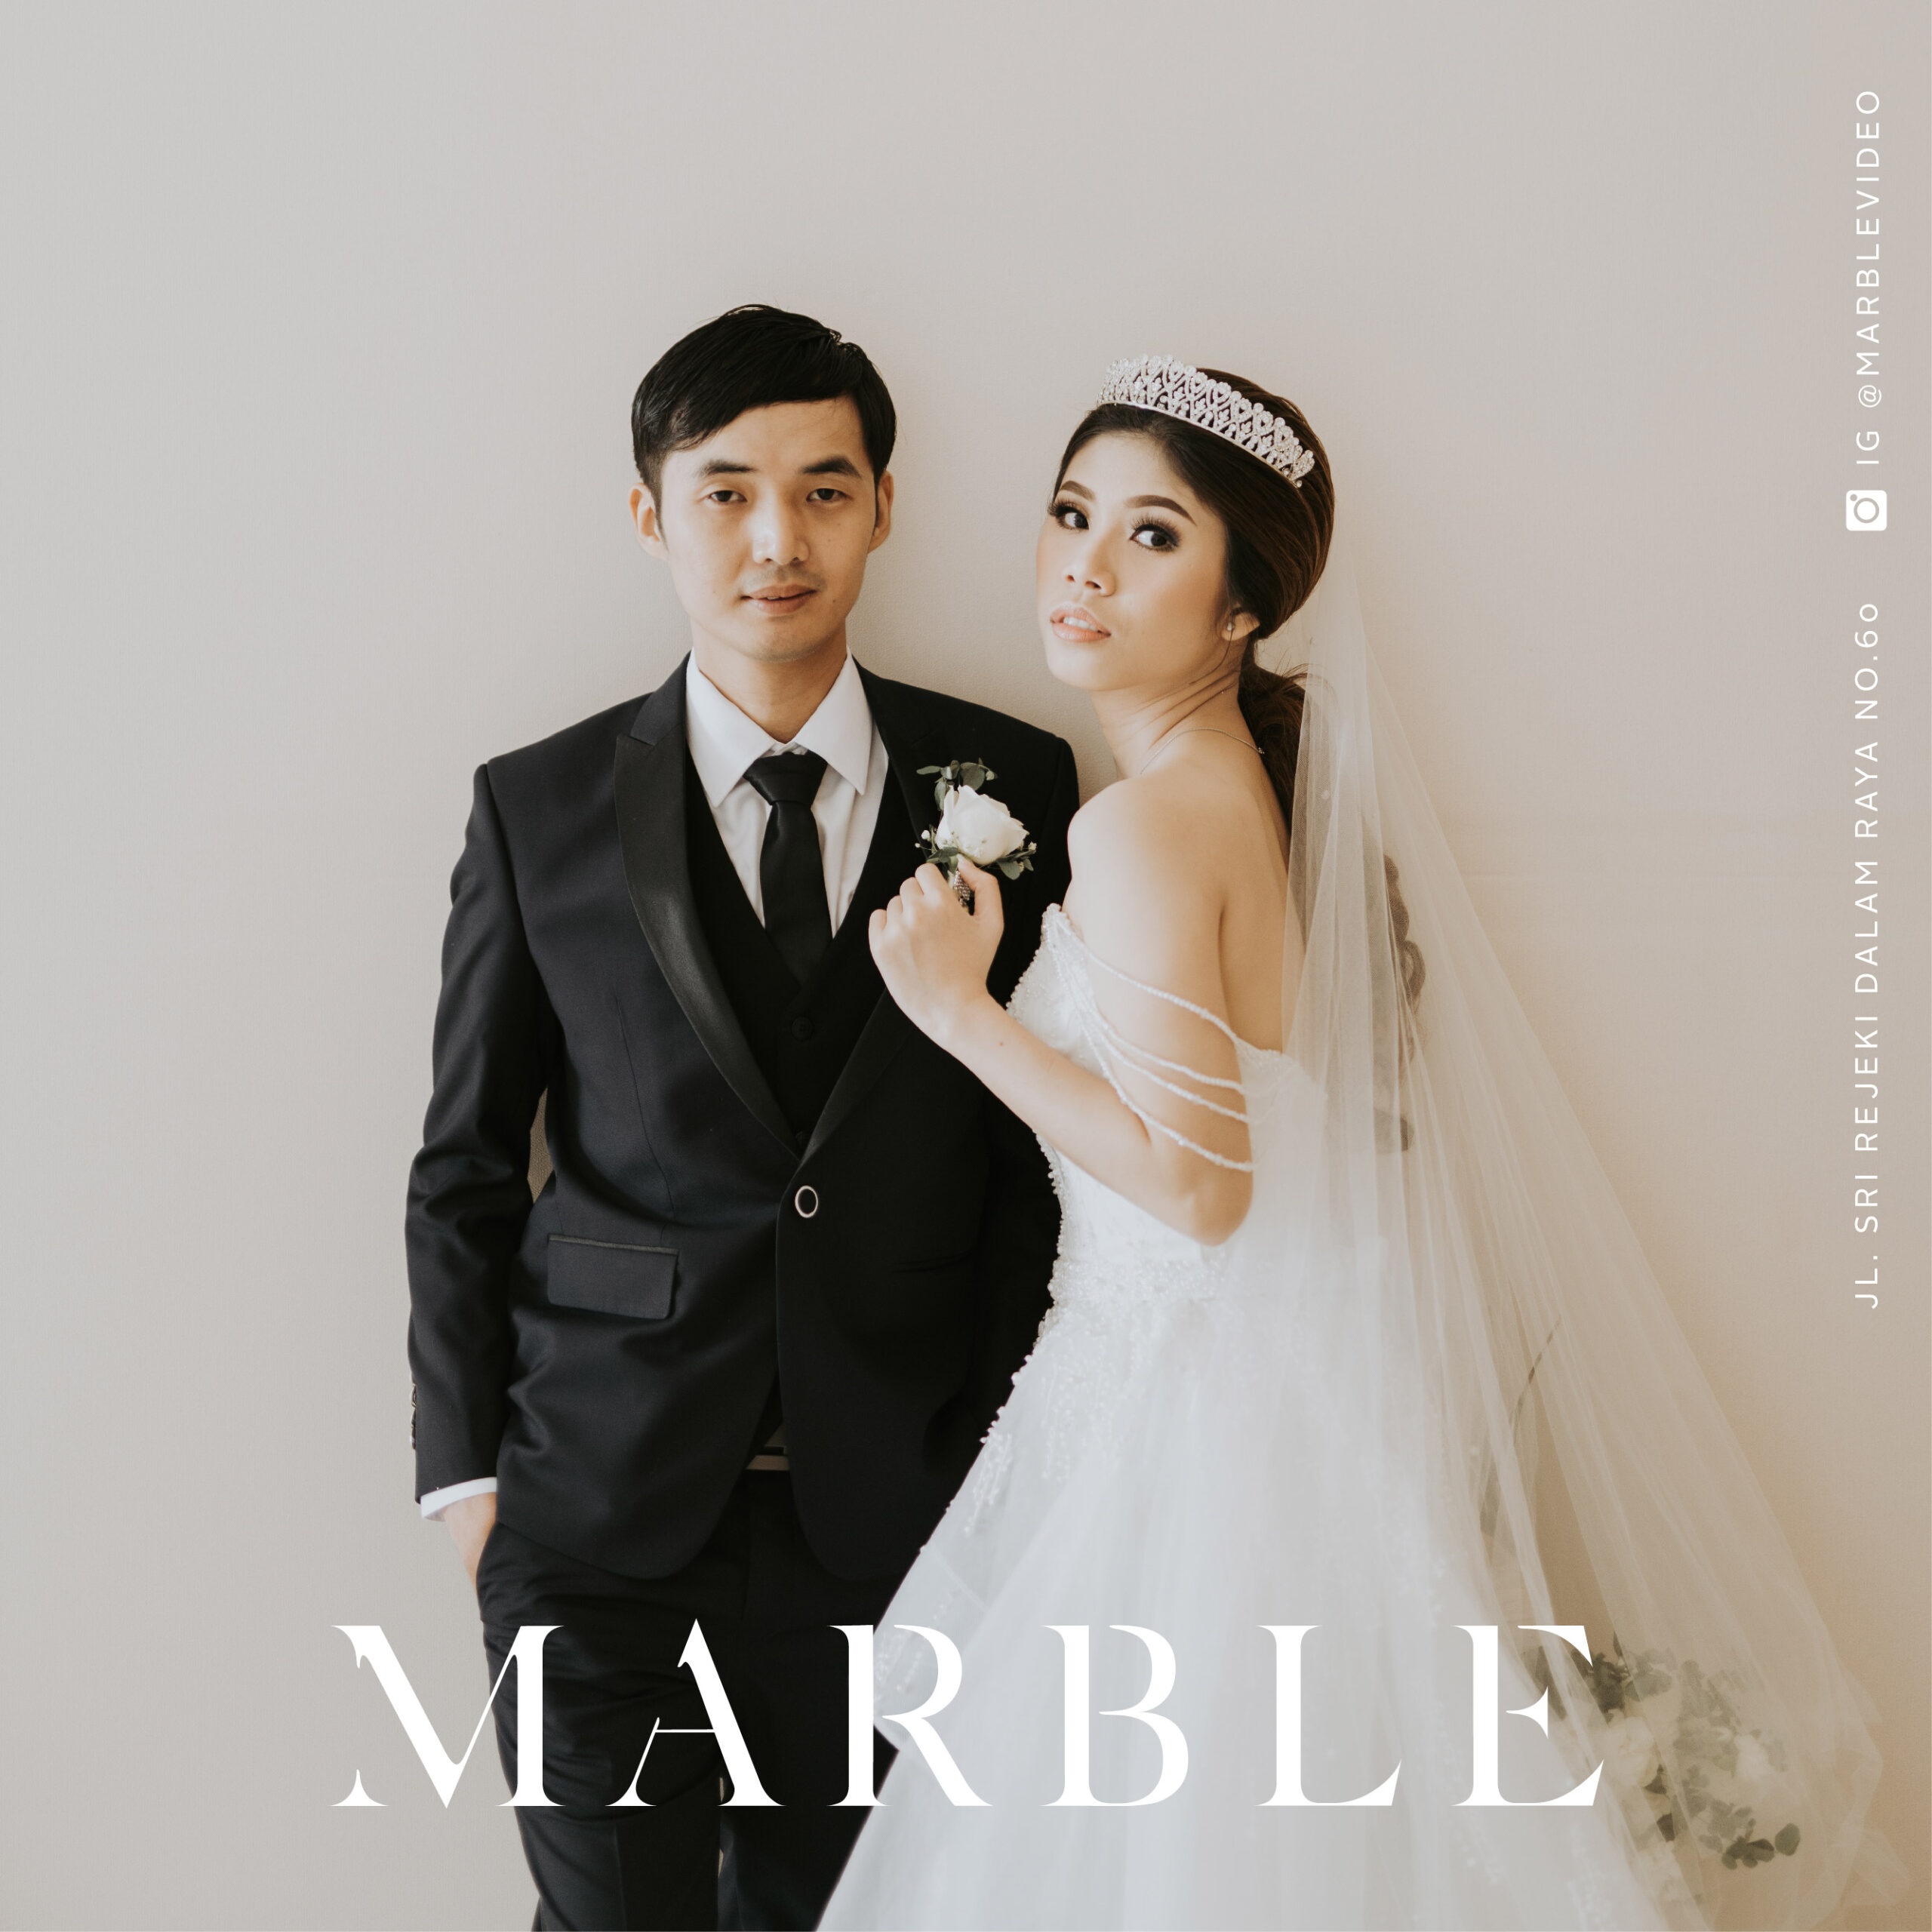 Marble Video